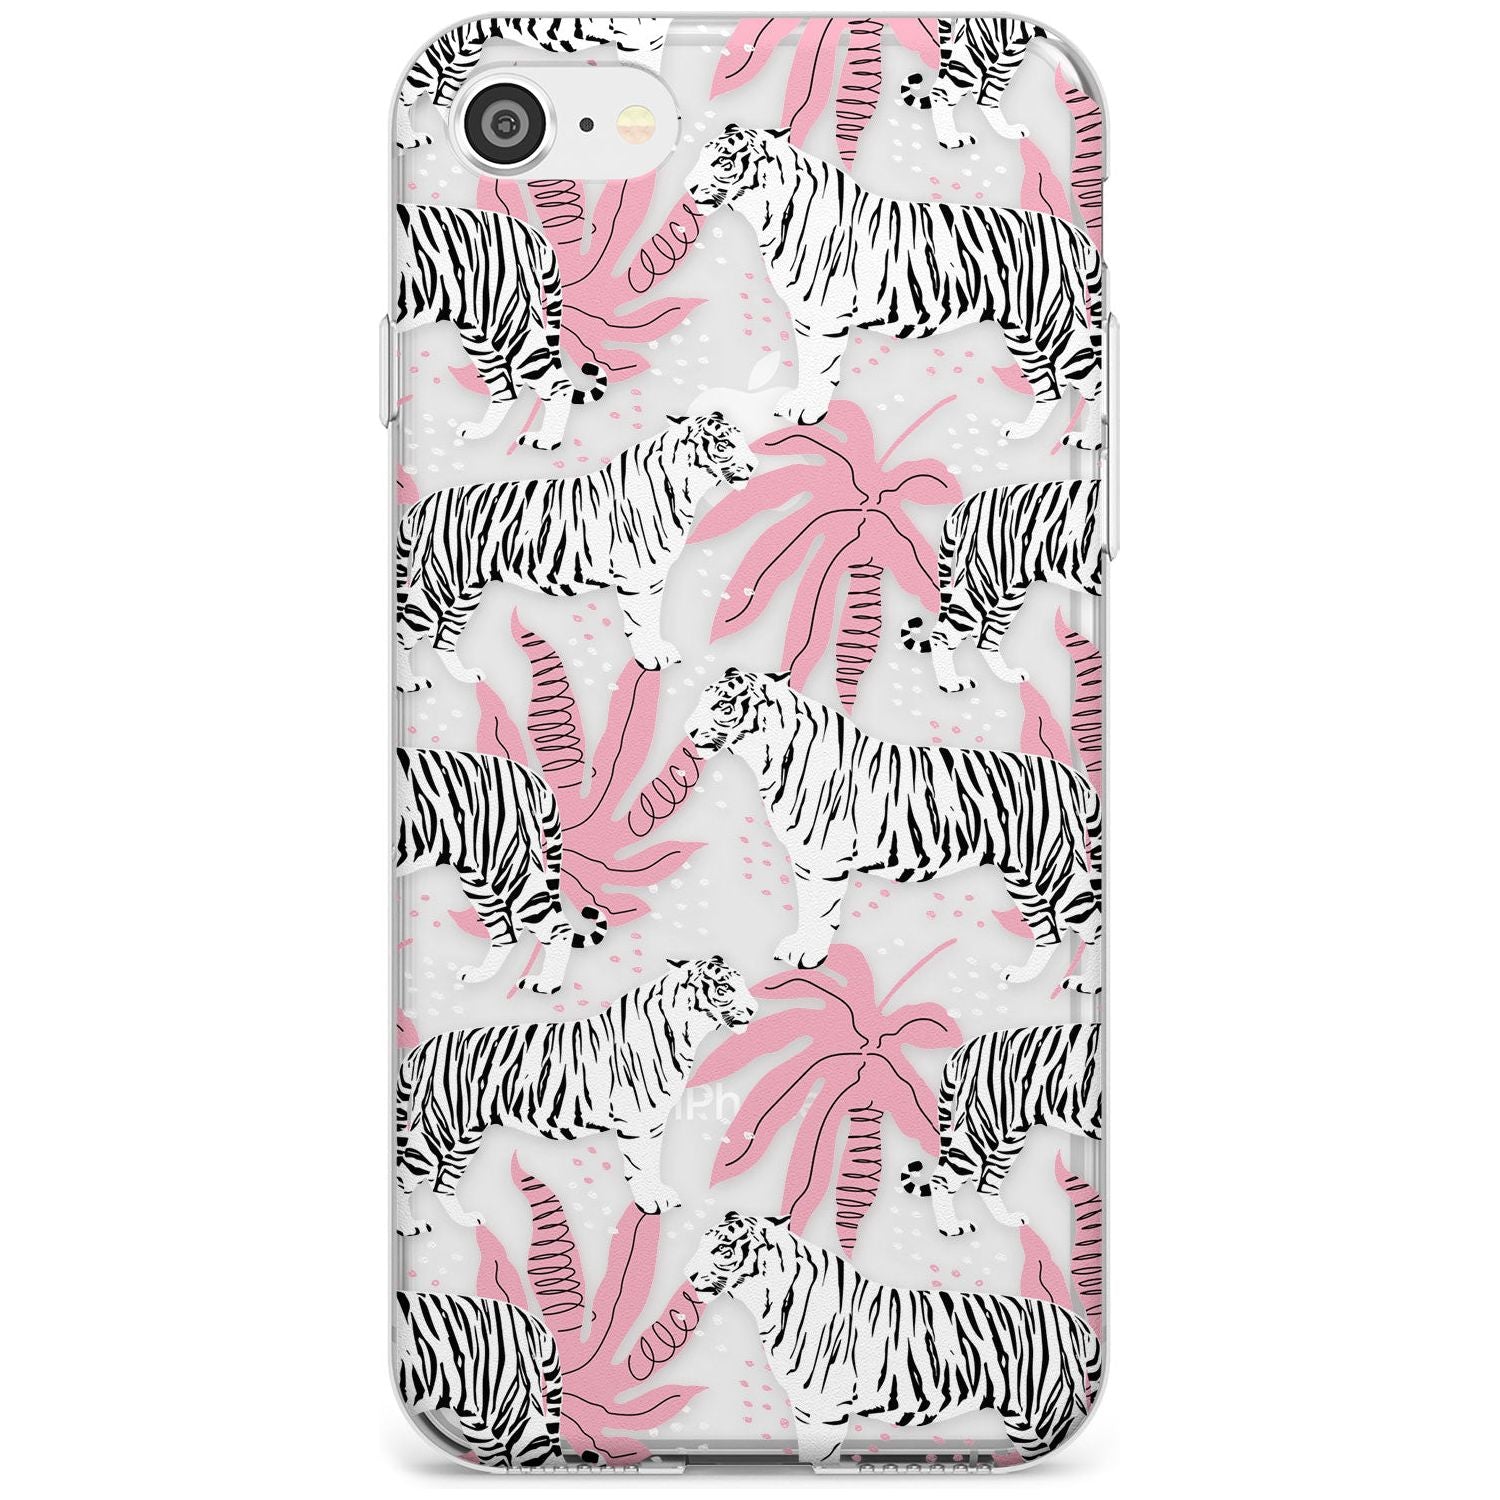 Tigers Within Slim TPU Phone Case for iPhone SE 8 7 Plus